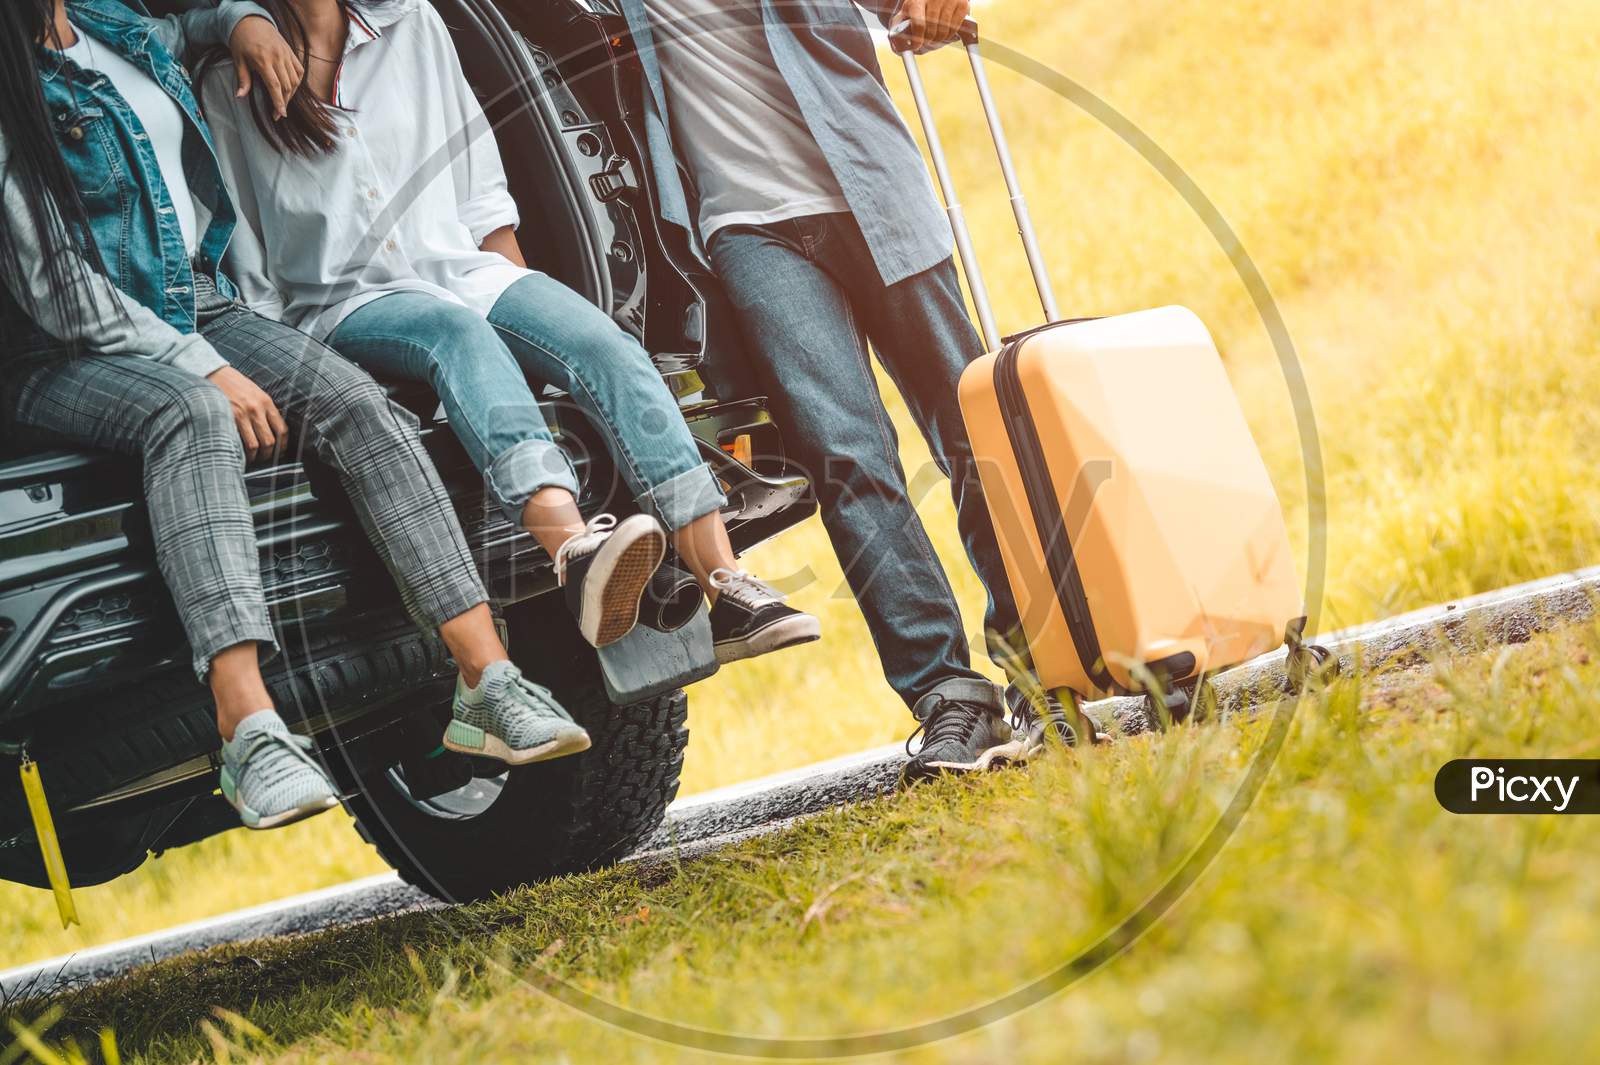 Closeup Lower Body Of Group Of Friends Relaxing On Suv Car Trunk With Trolley Luggage Along Road Trip With Autumn Mountain Hill Background. Freedom  Road Way. People Lifestyle Transportation Travel